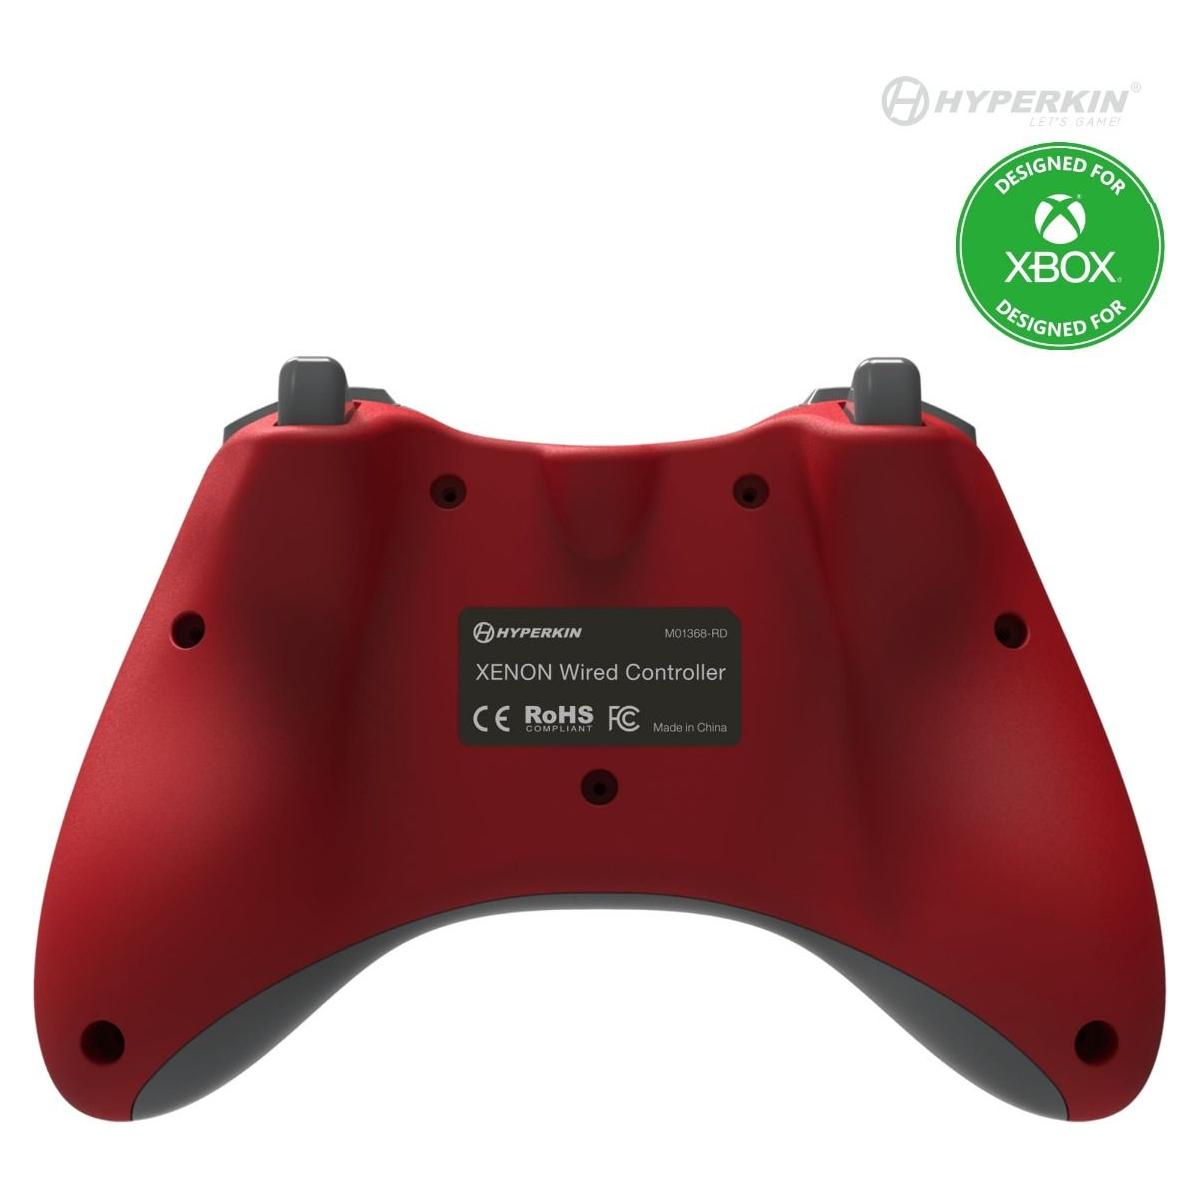 Xenon Wired Controller for Xbox One / Series X (Red)